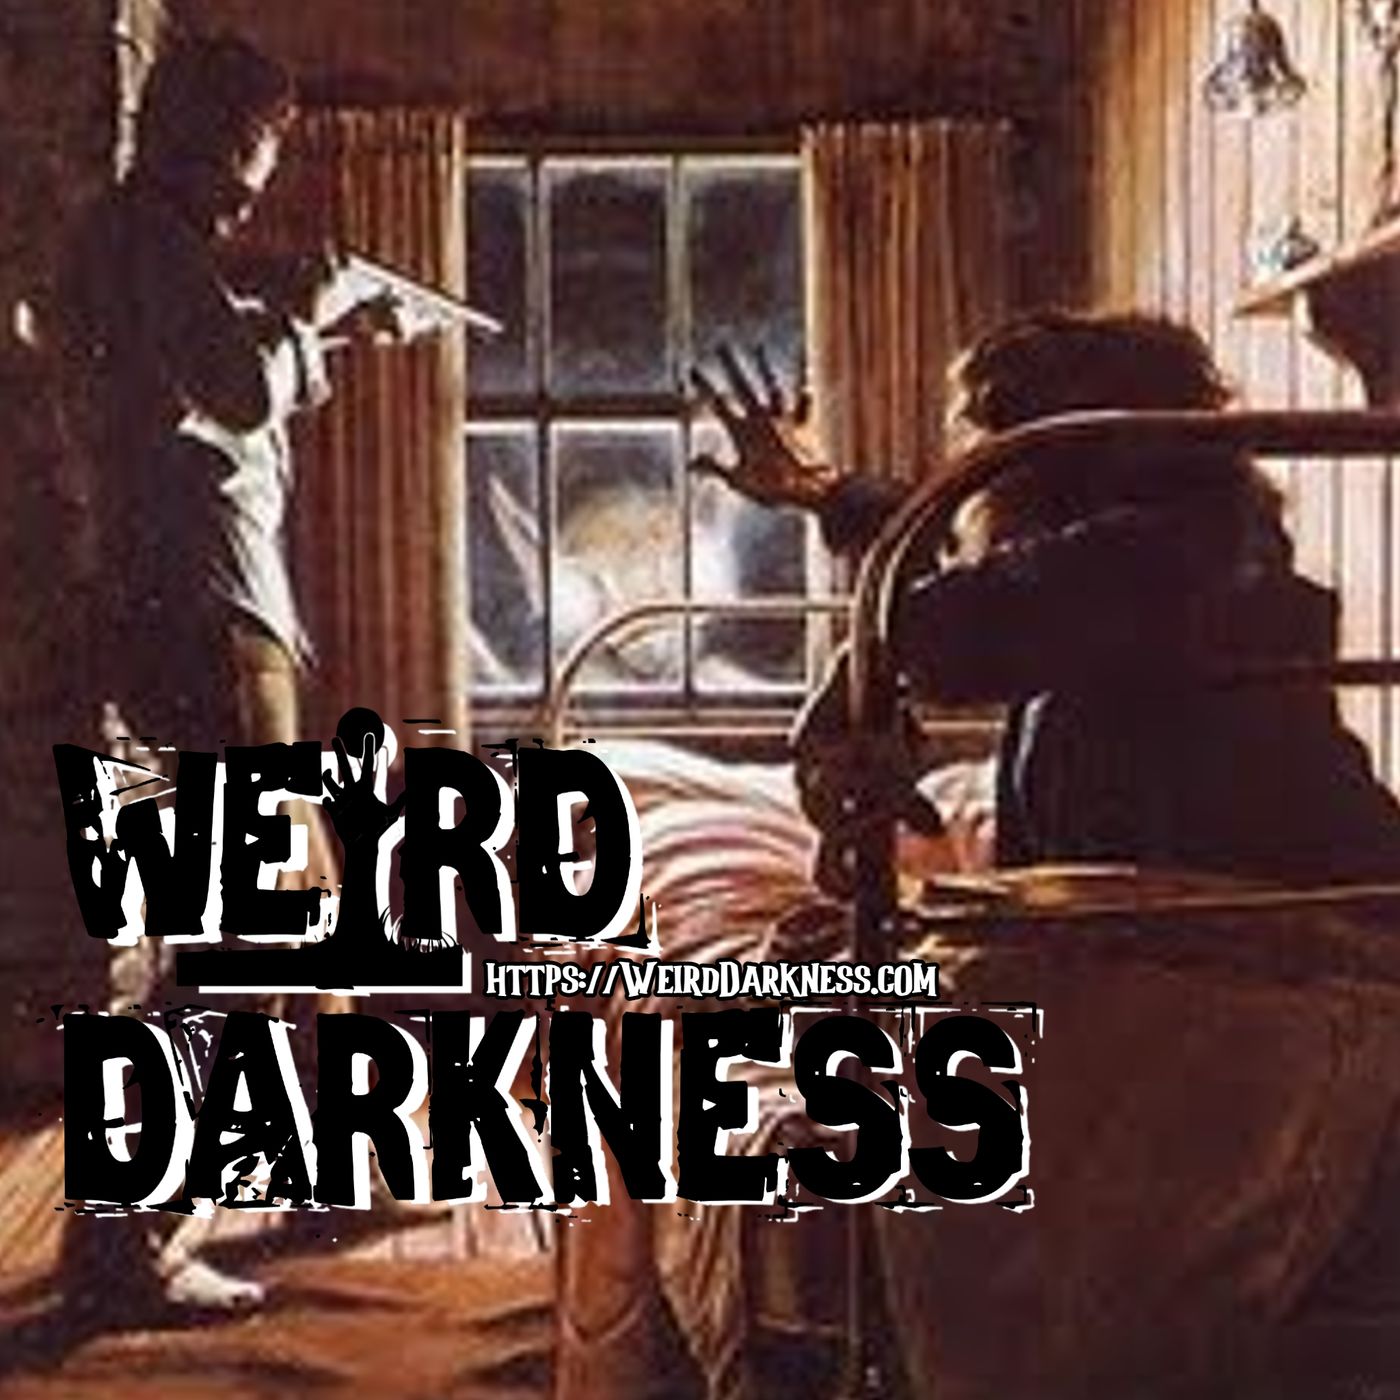 “THE KELLY-HOPKINSVILLE SHOOTOUT WITH ALIENS” and More Strange True Stories! #WeirdDarkness